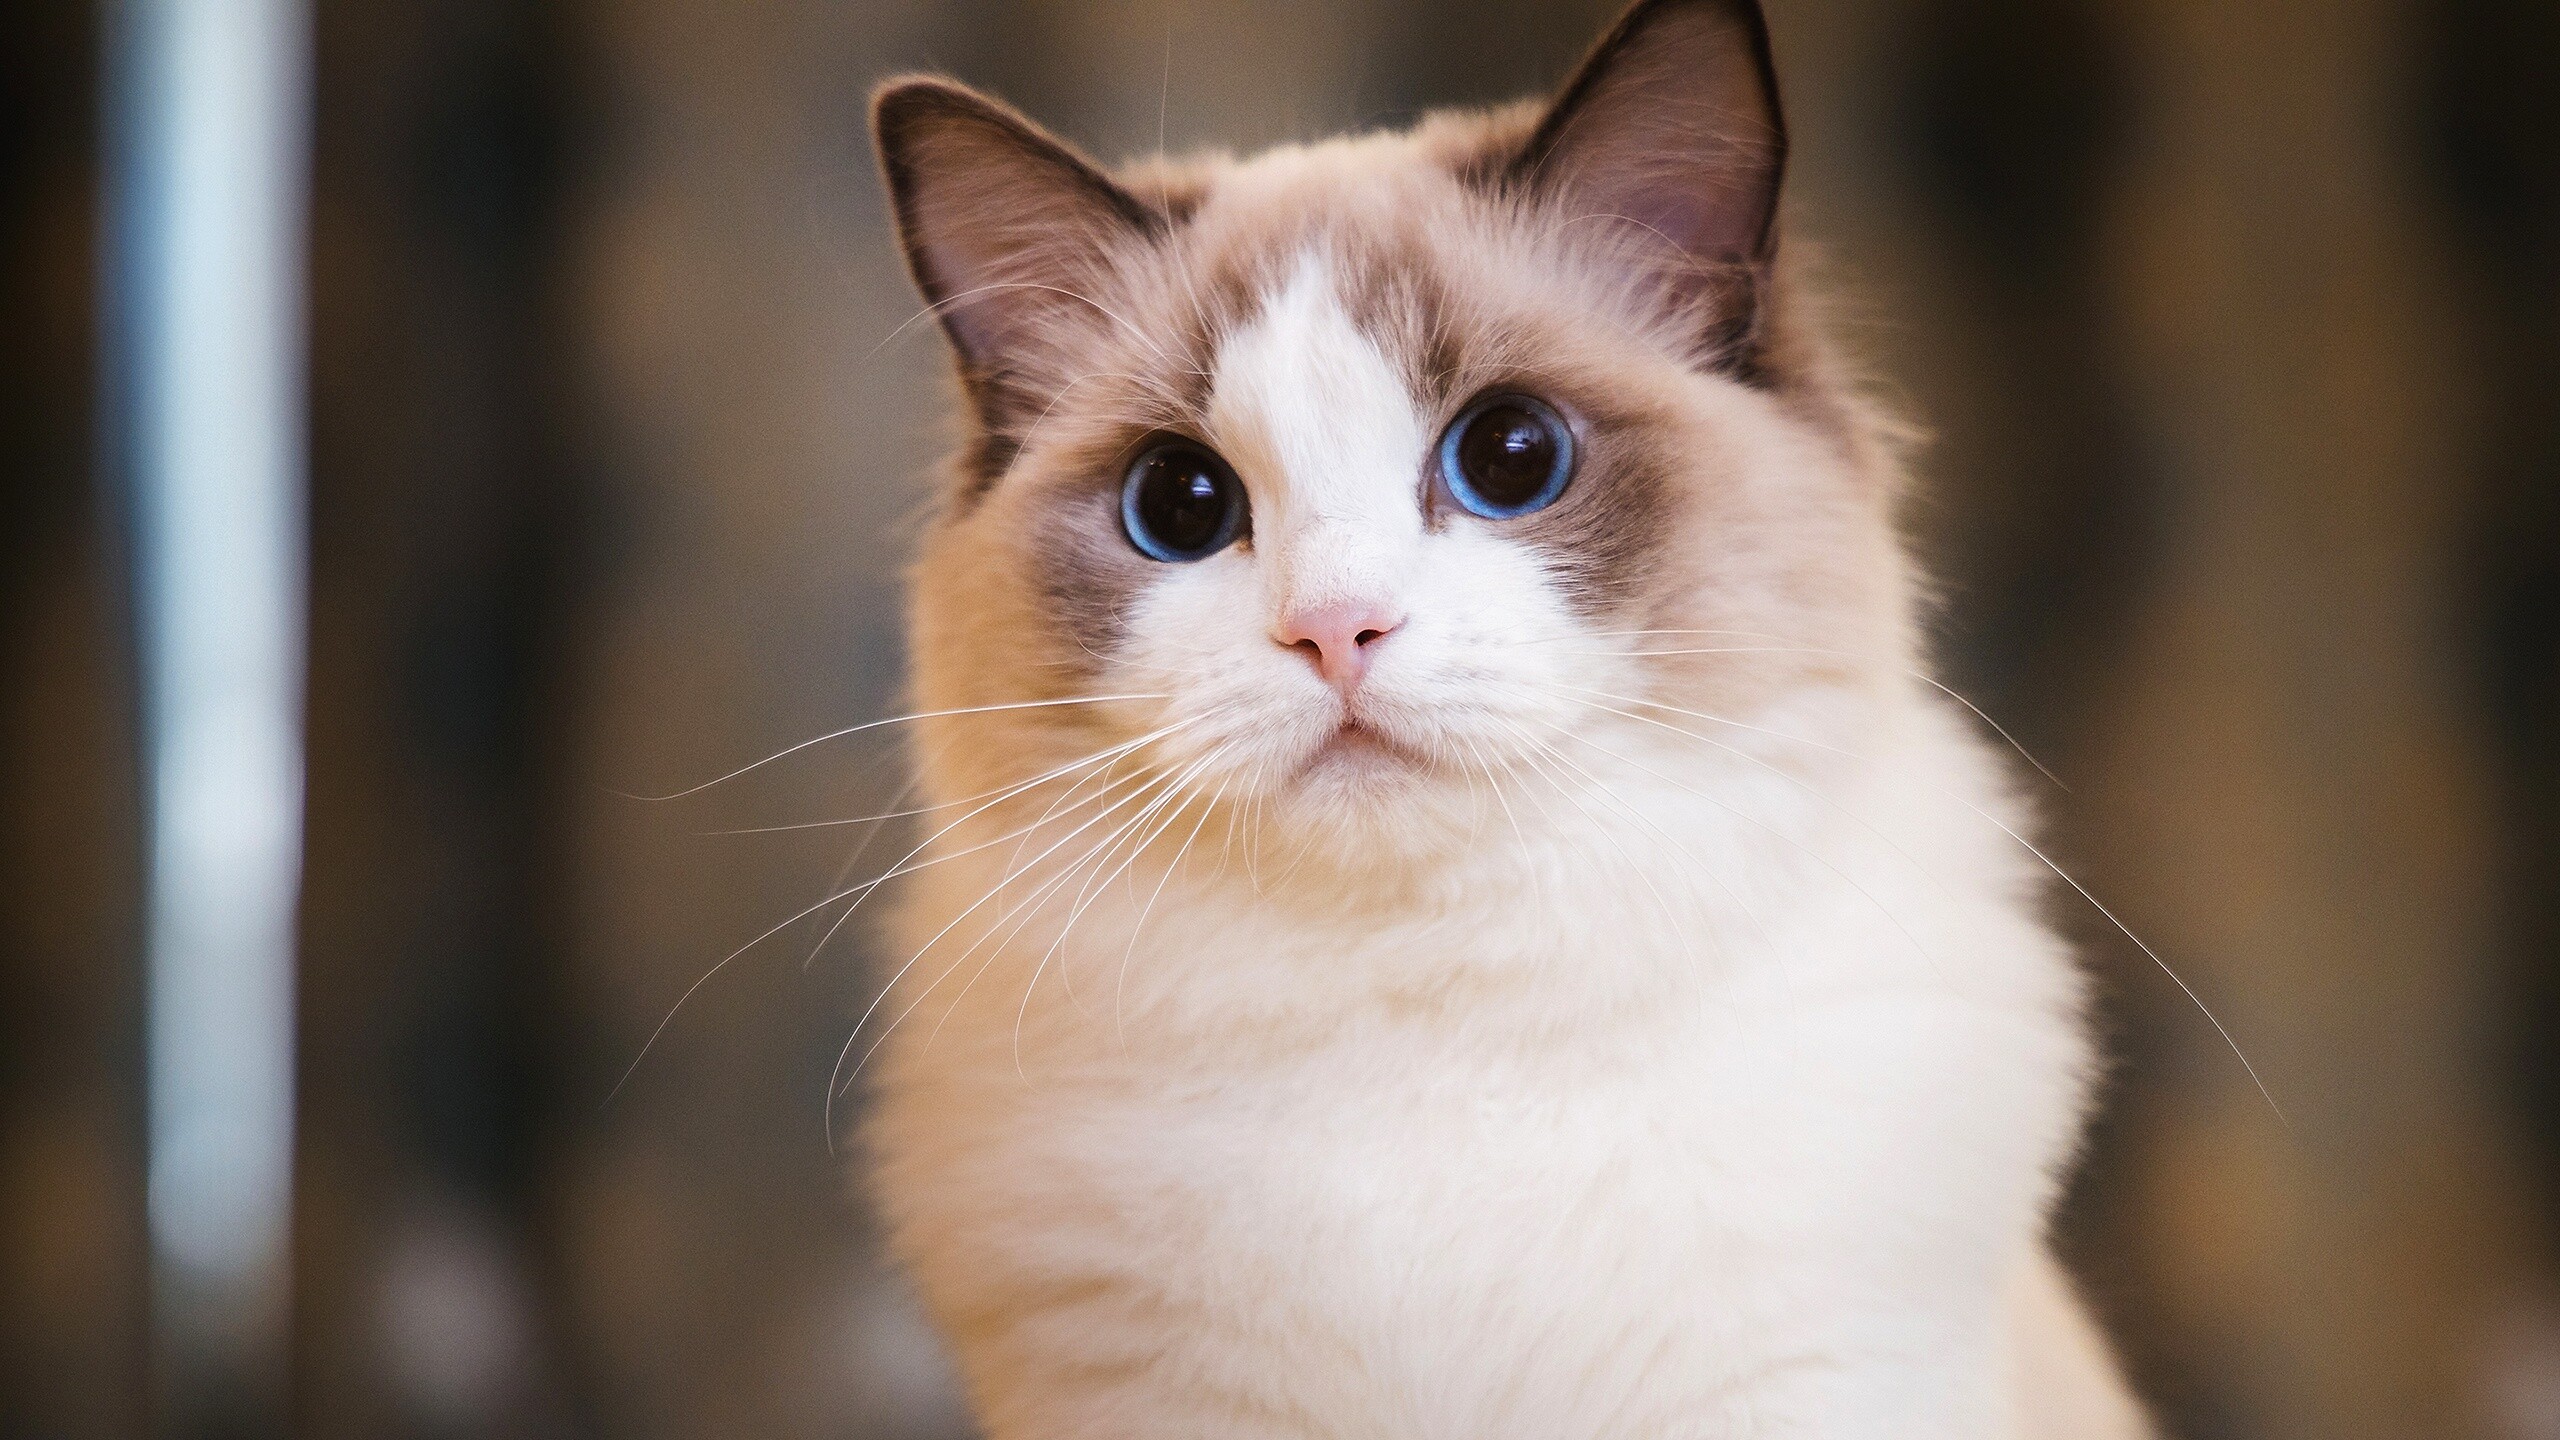 Ragdoll: The breed is often known for its large round deep blue eyes. 2560x1440 HD Wallpaper.